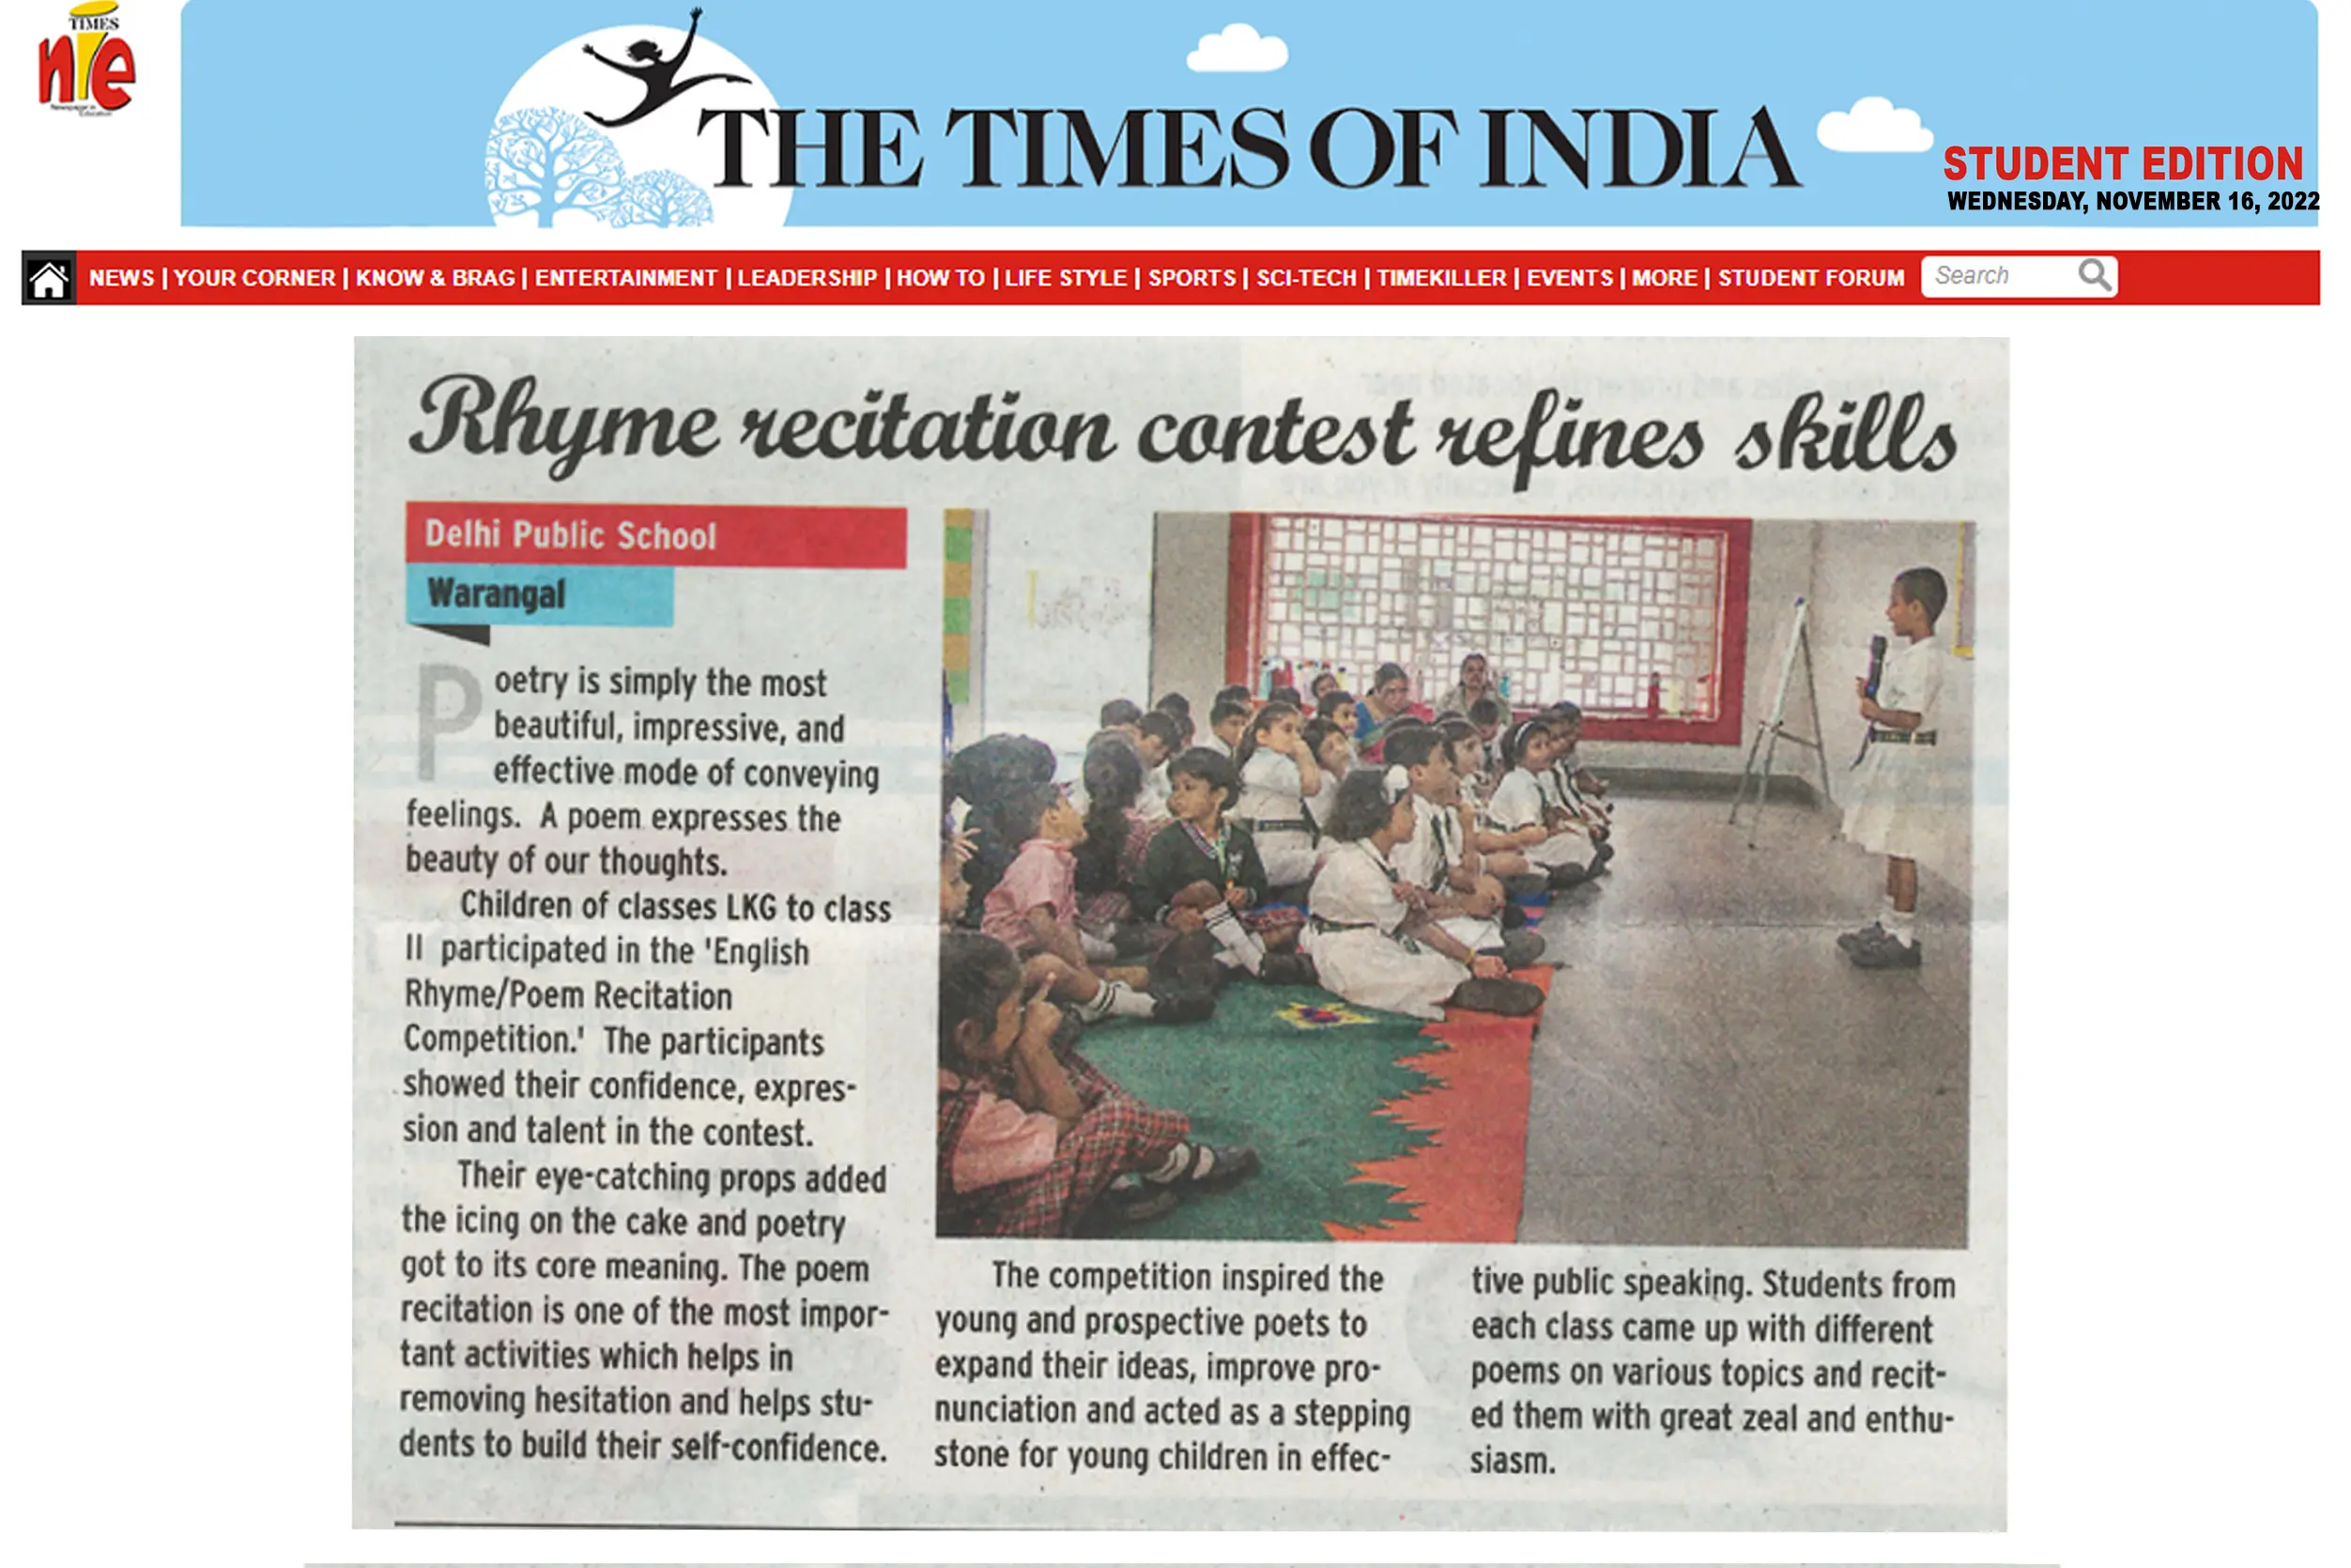 An article describing about the rhyme recitation contest at DPS Warangal got published in The Times Of India.